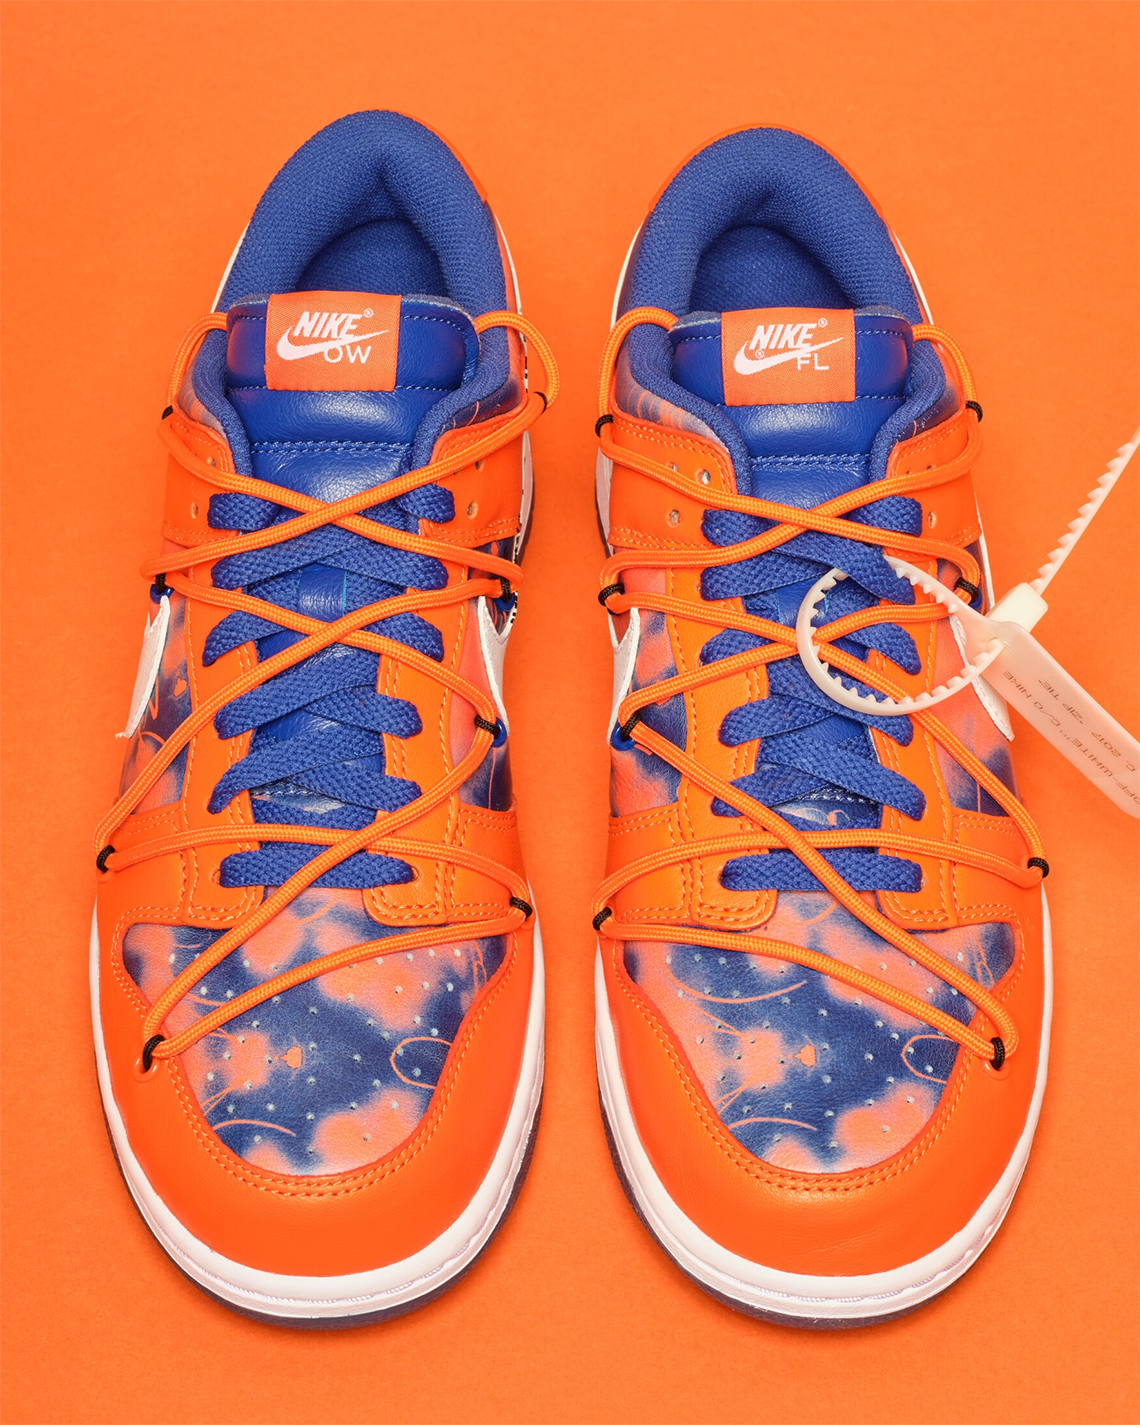 Off White Futura Dunks - Going Once, Going Twice… Sold!